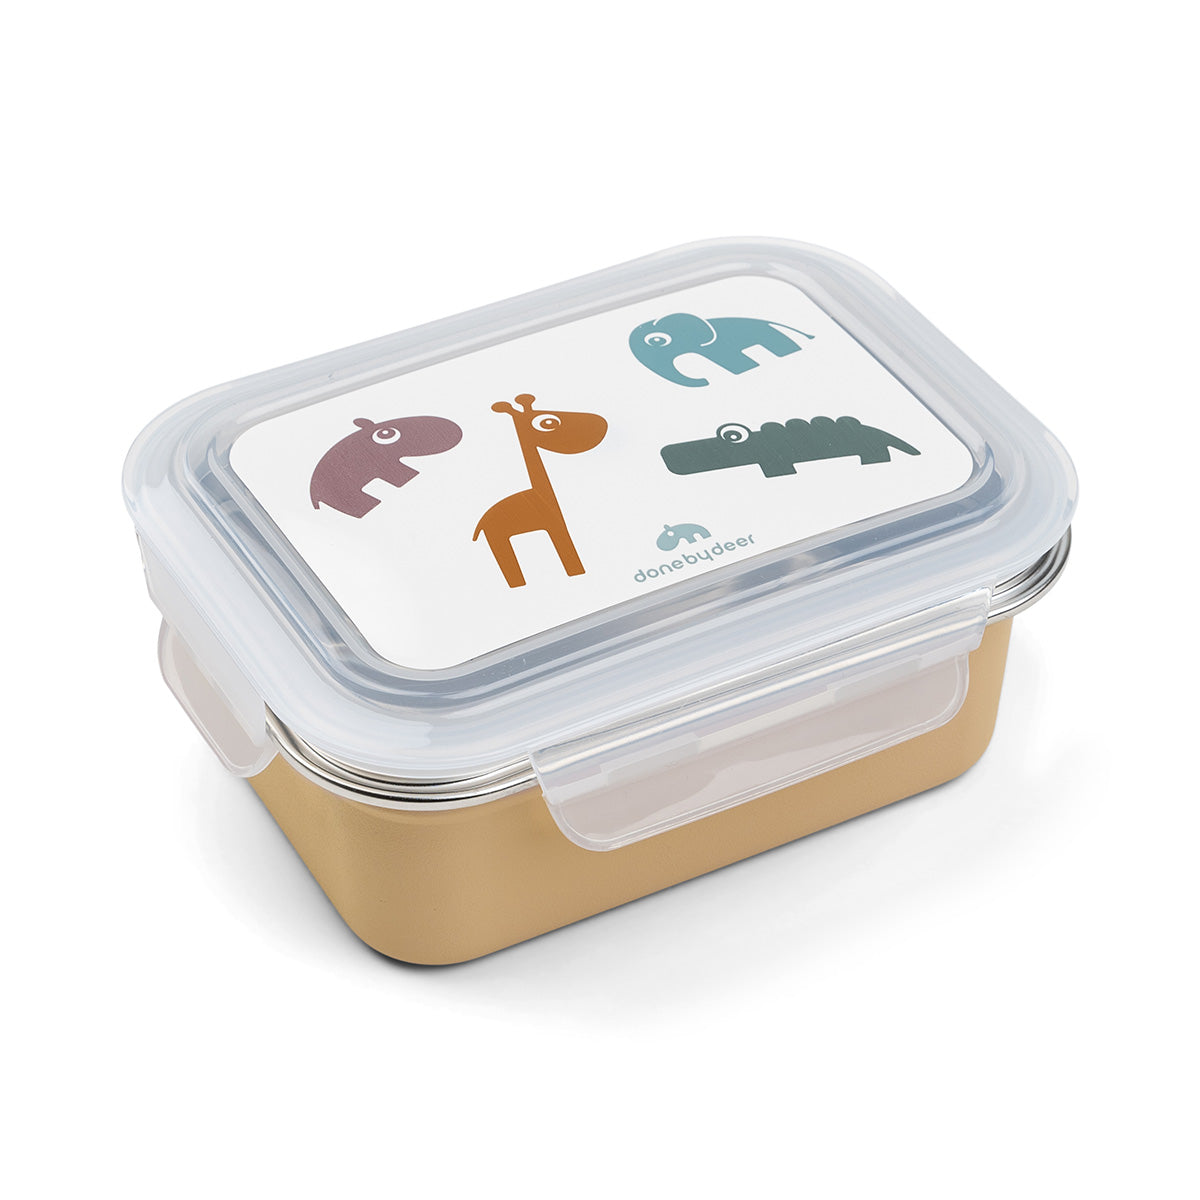 Lunch boxes & snack boxes for kids - Dishwasher safe - Done by